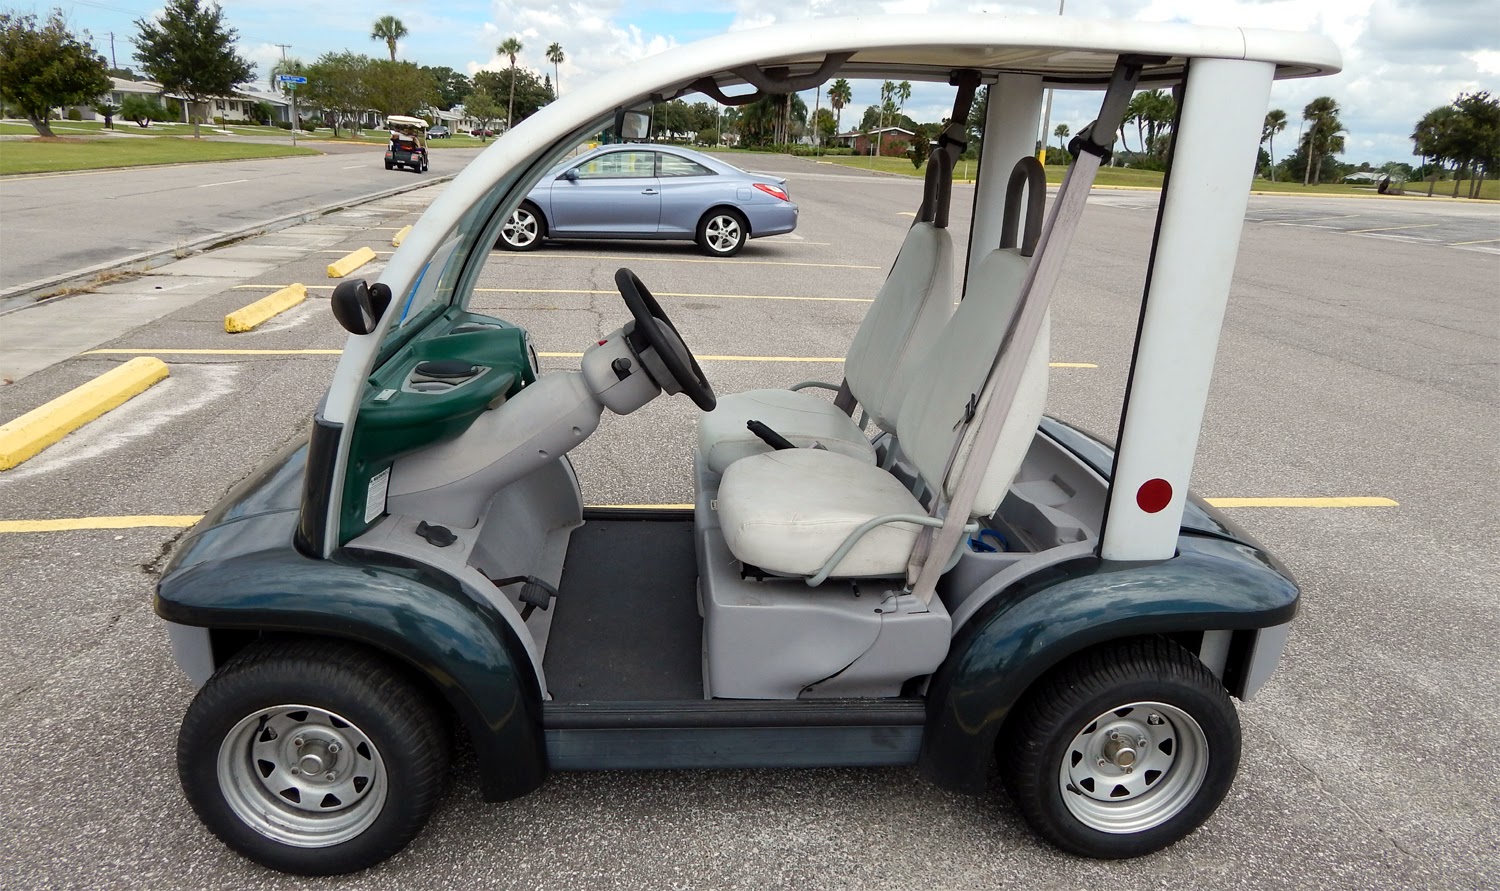 [PRICES] 2002 Ford THINK electric cart 4,000 Sun City Center, Florida